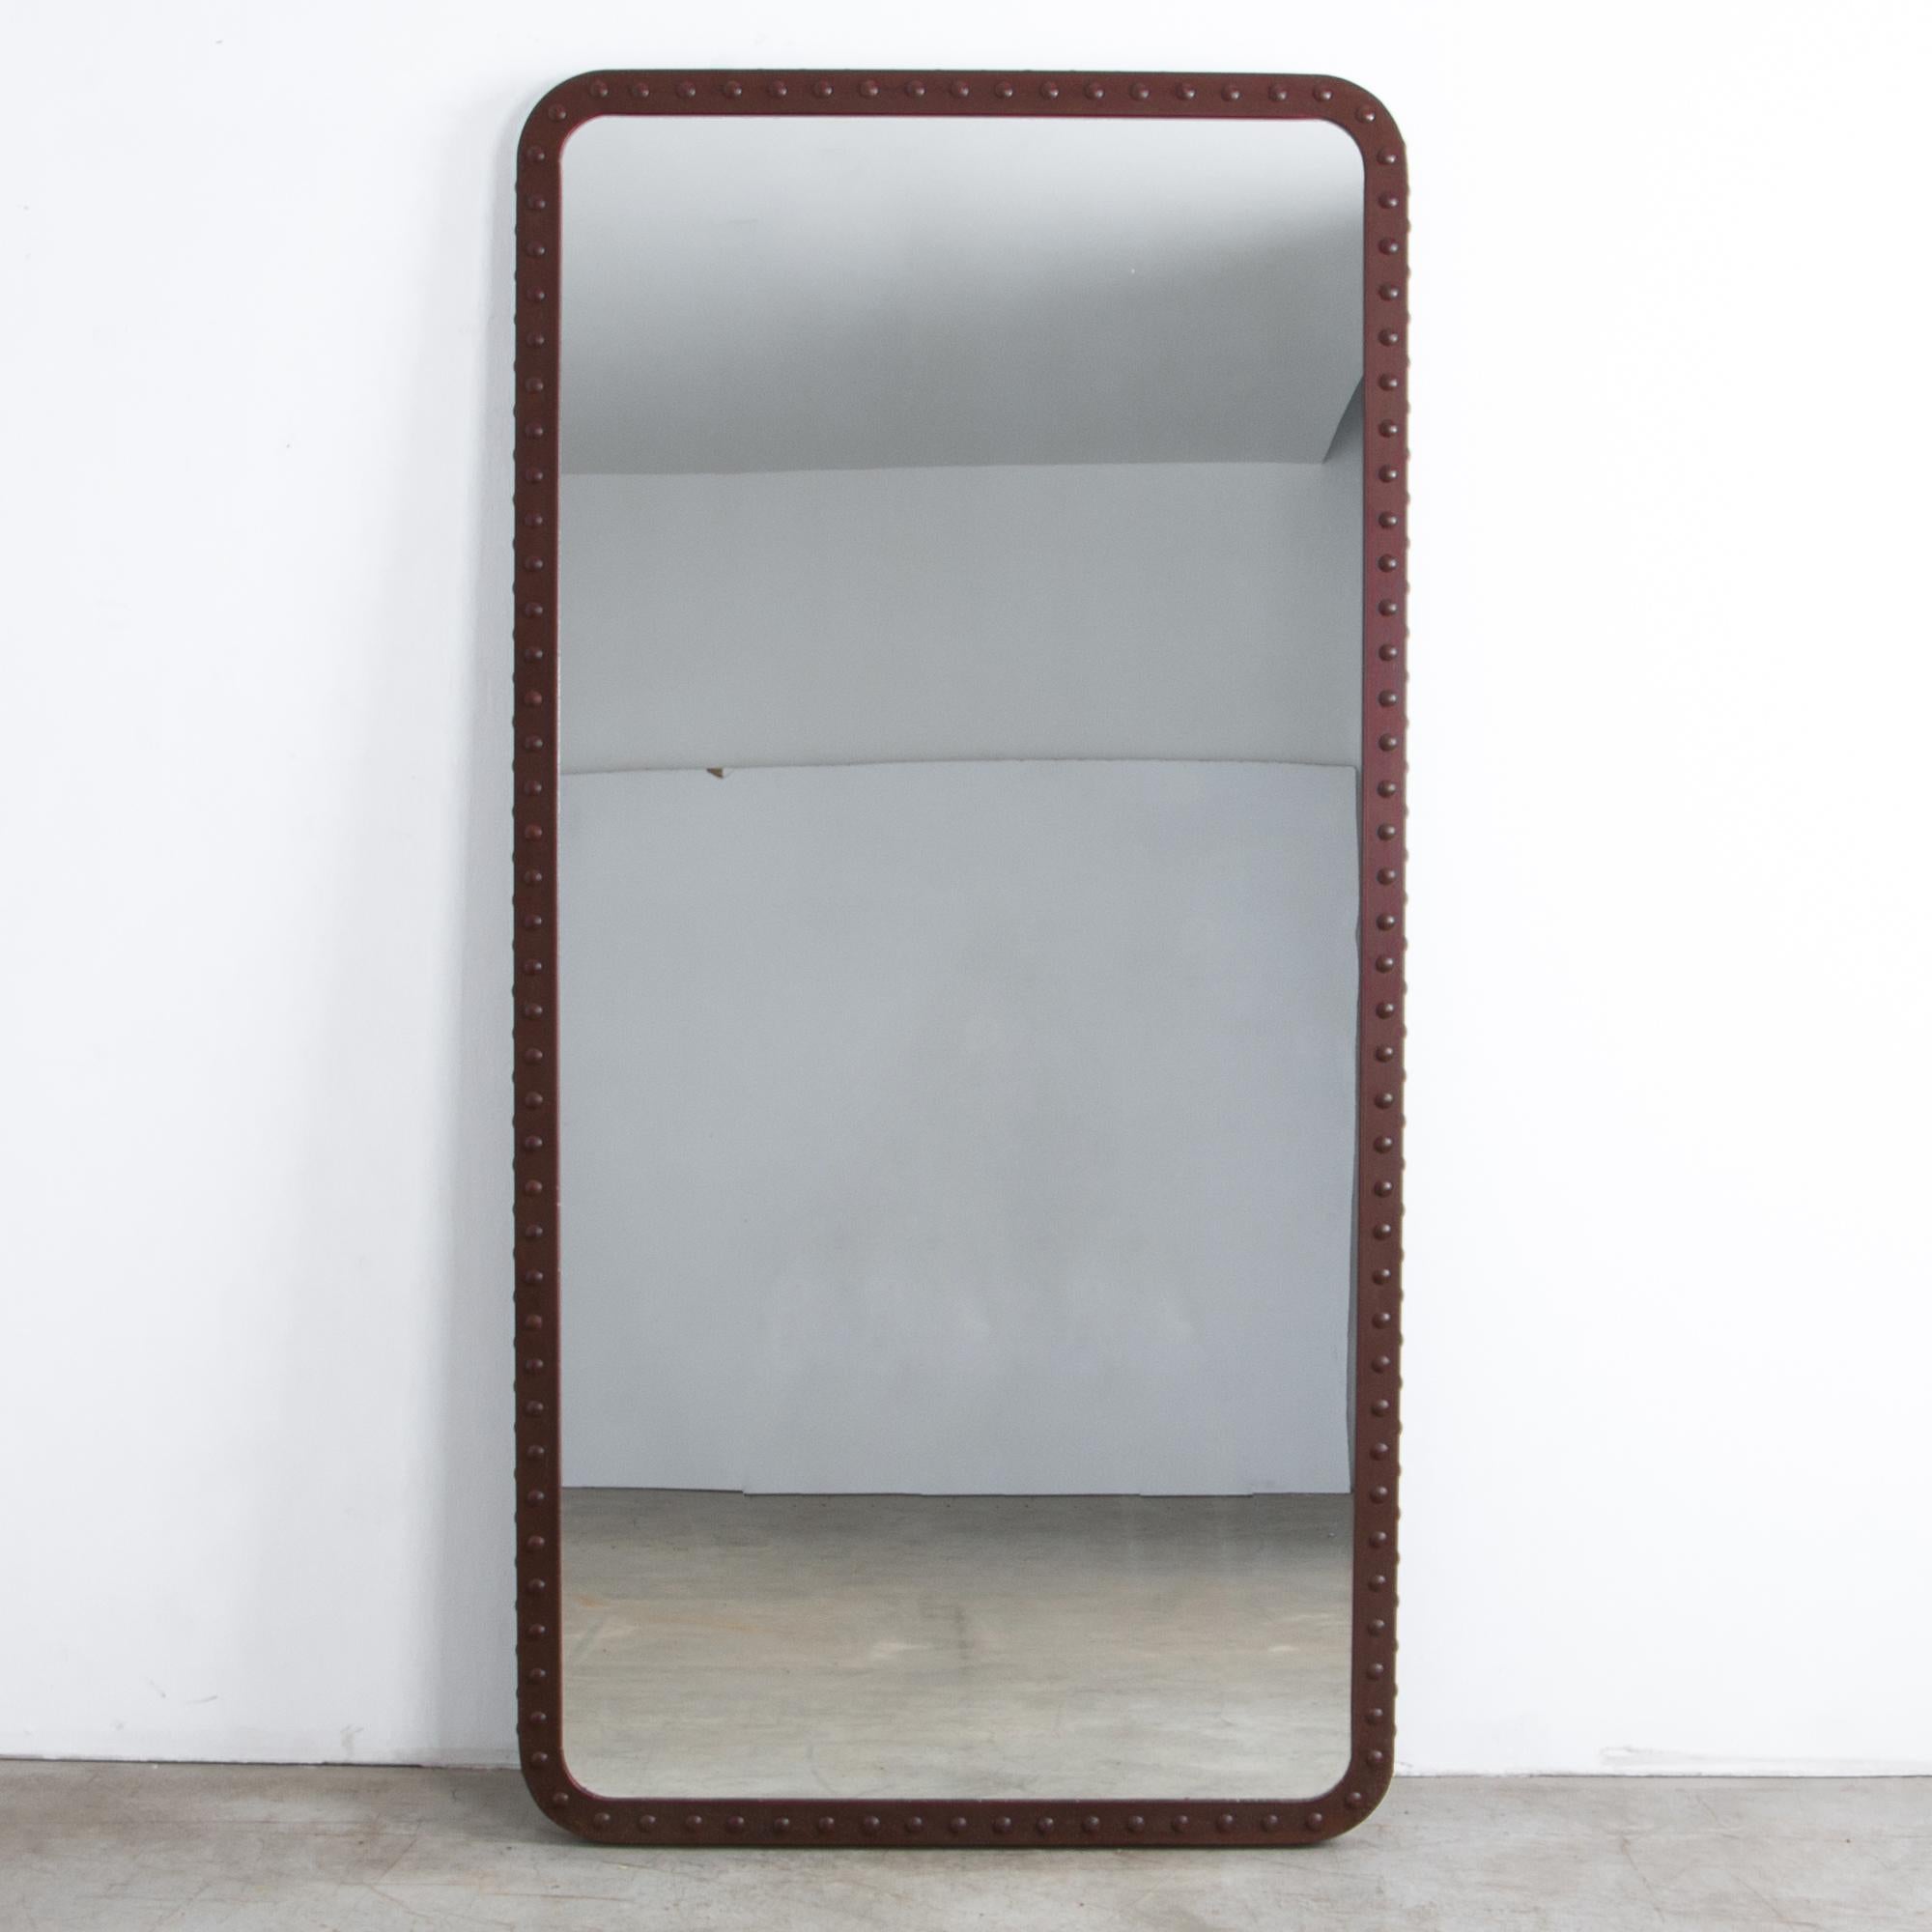 A prototype from our atelier, this mirror interprets the architecture of antiquated factories. Riveted iron bars become a decorative motif. An industrial aesthetic meets an old-world elegance, seen through a clean and contemporary lens.